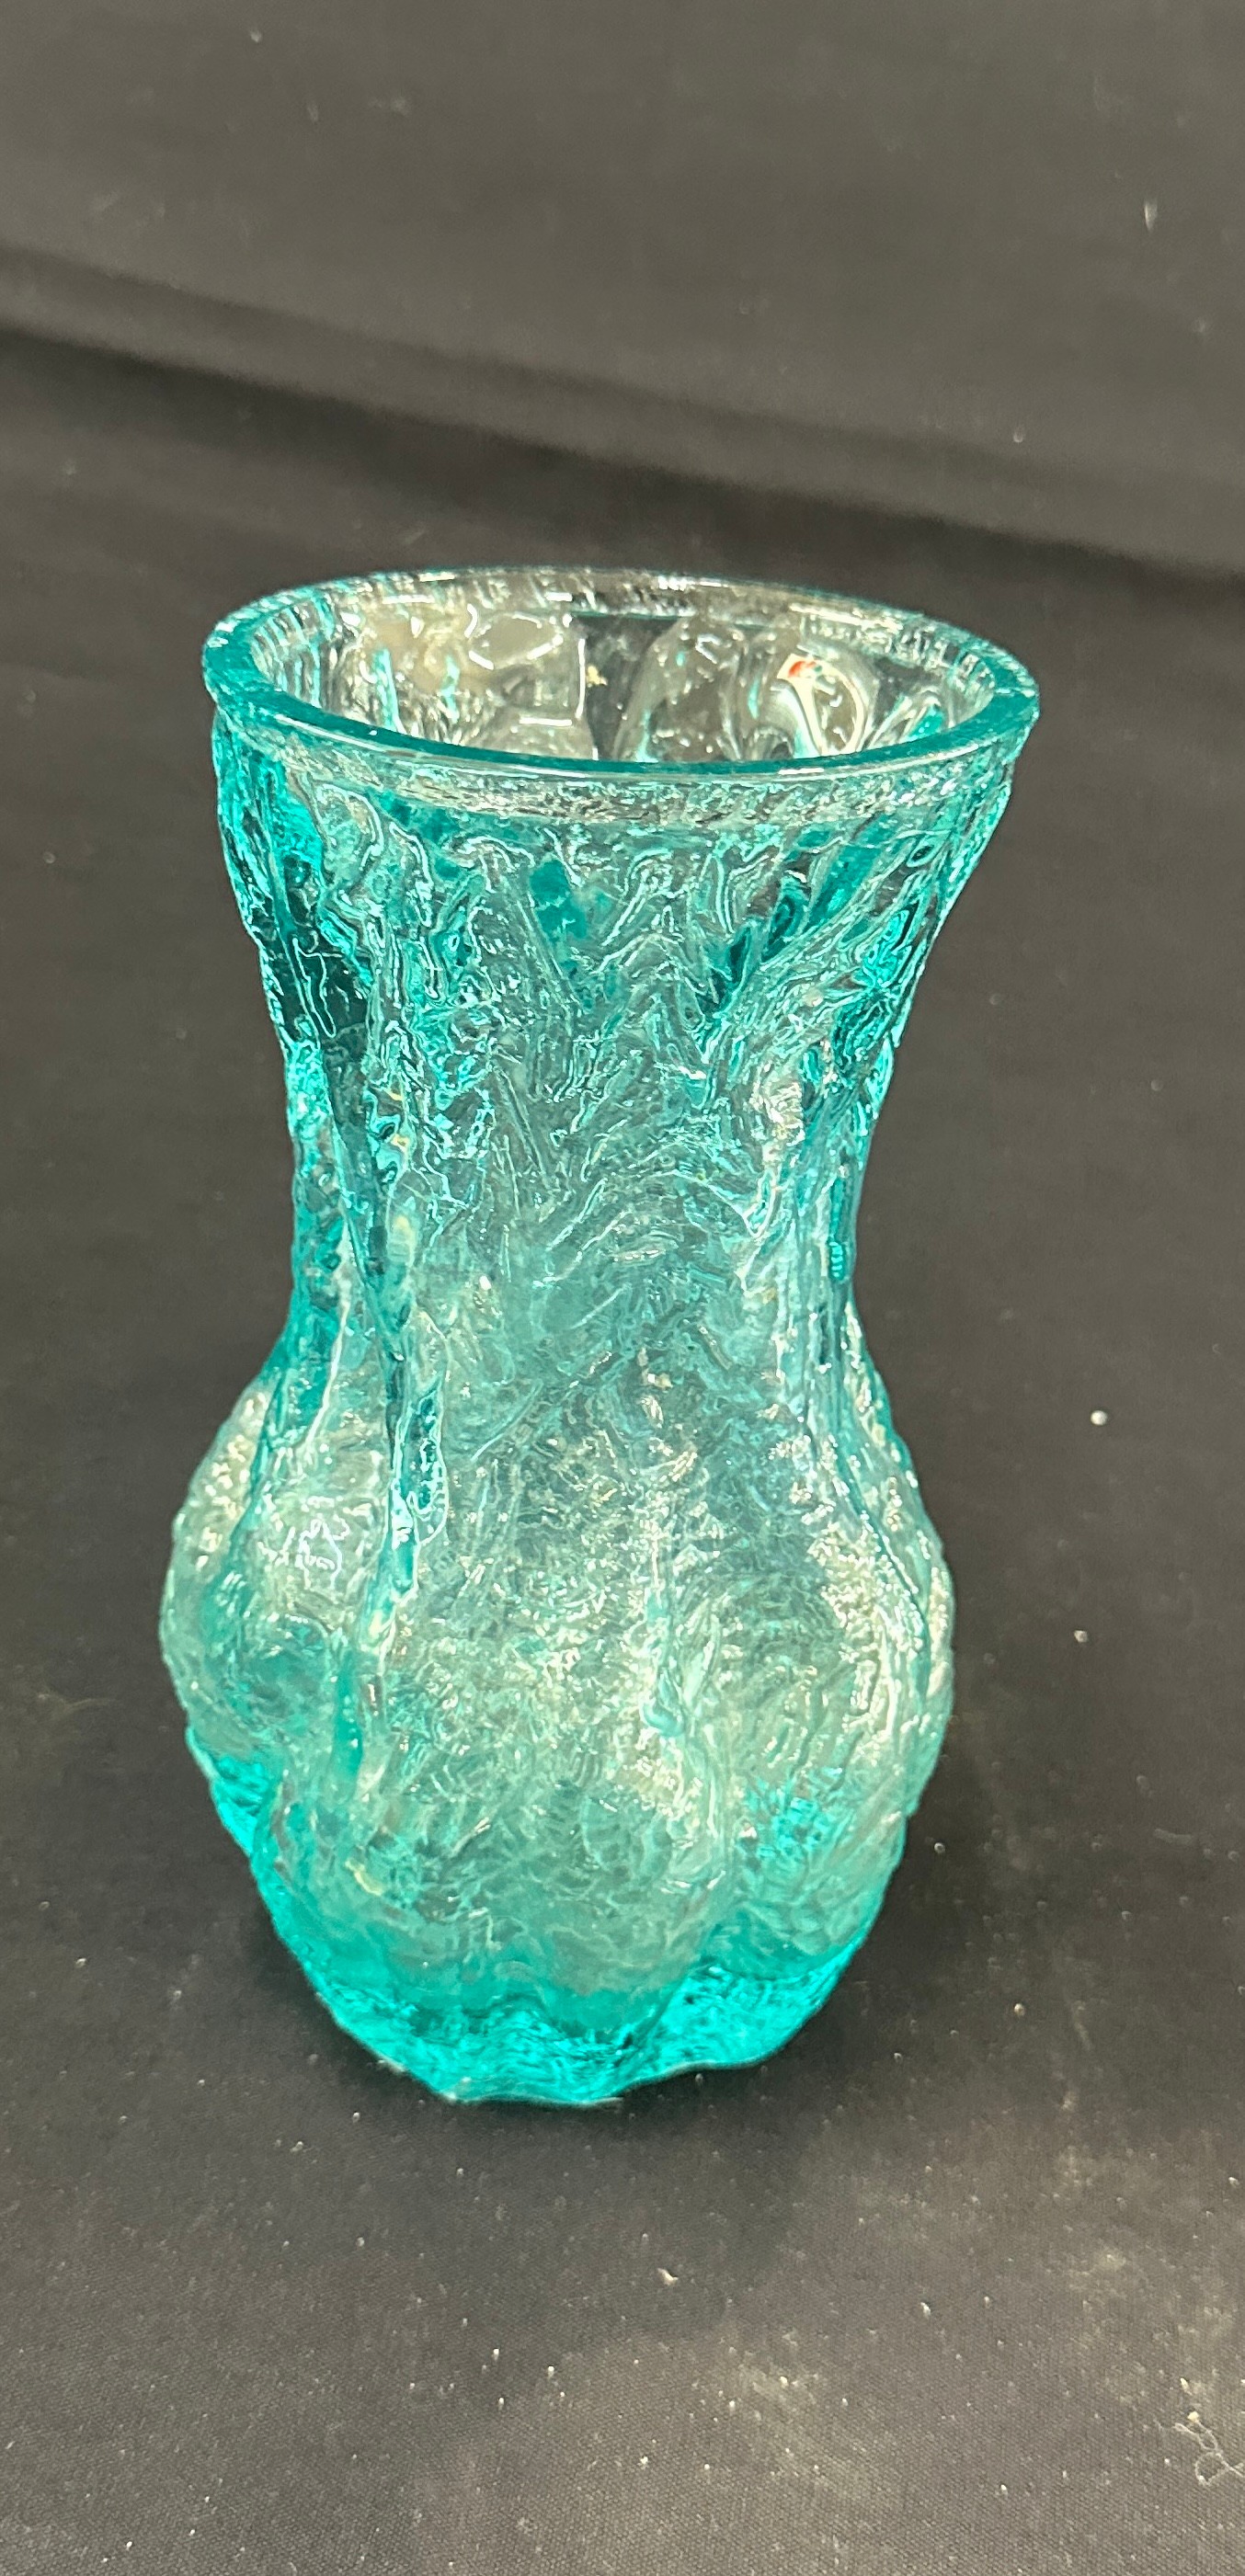 Decorative glass vase, possibly Whitefriars, overall height 8 inches